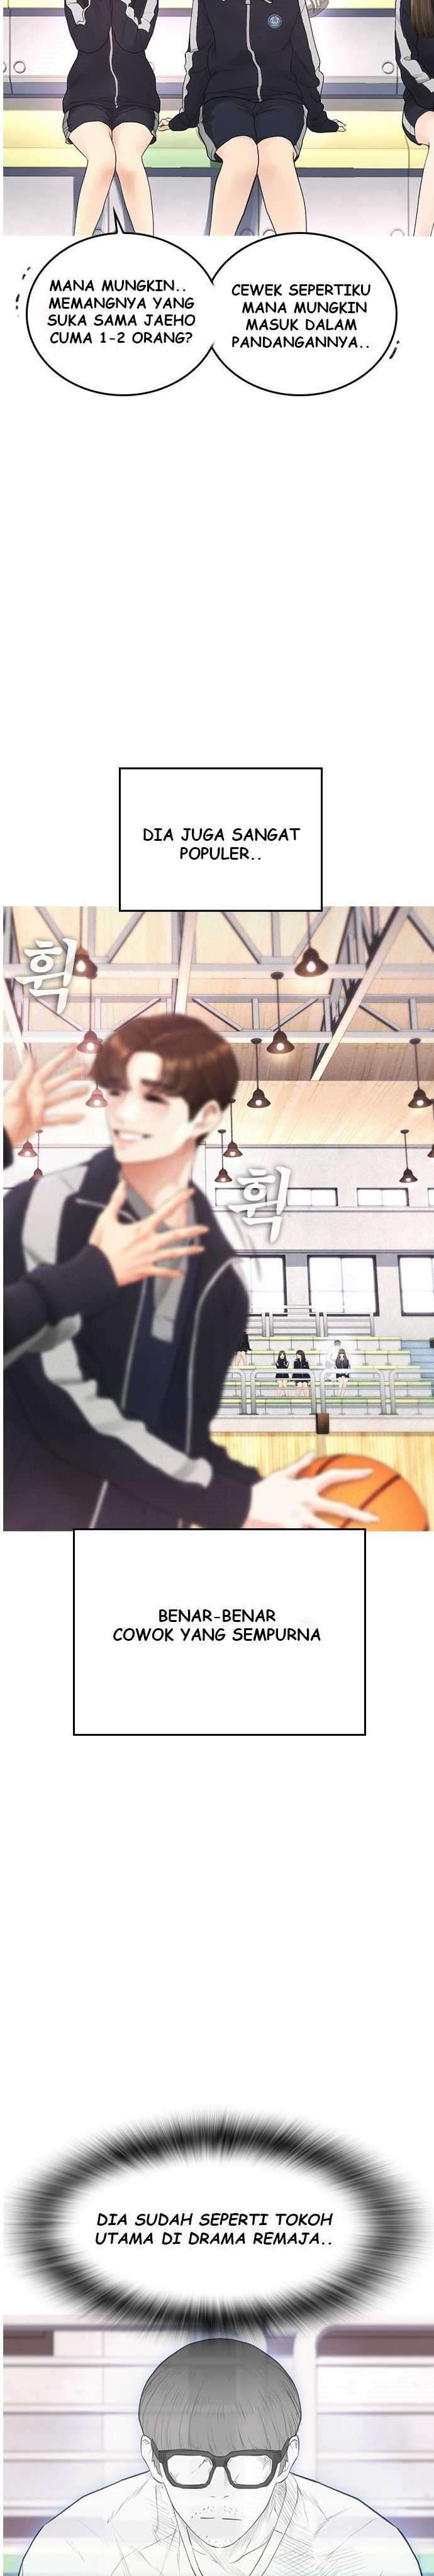 Highschool Lunch Dad Chapter 13